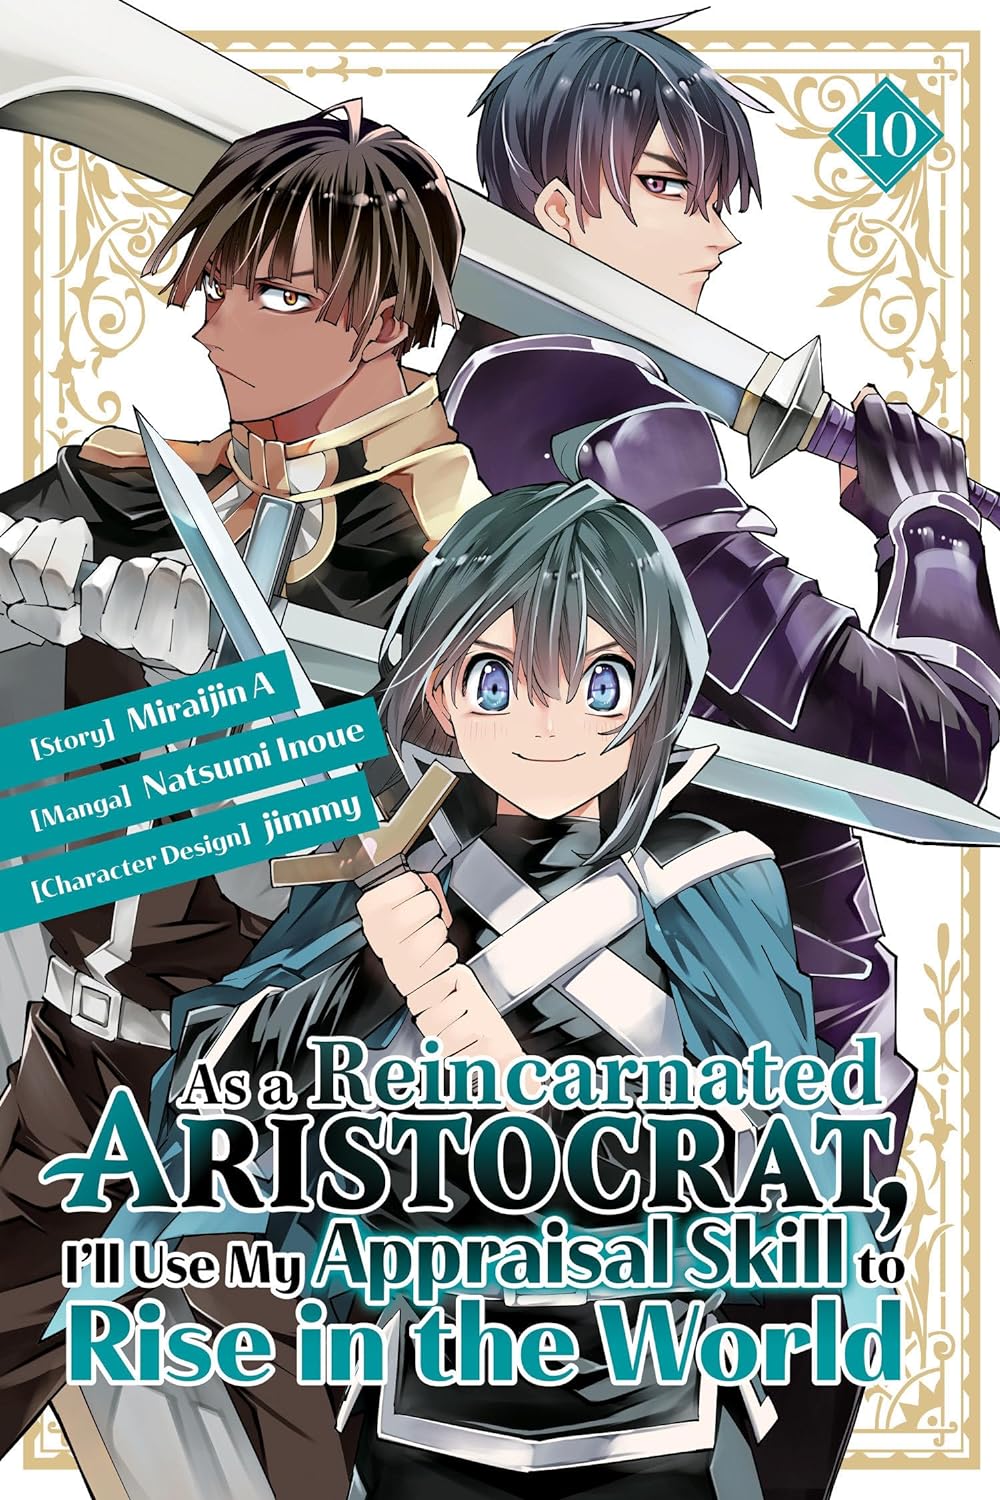 (28/05/2024) As a Reincarnated Aristocrat, I'll Use My Appraisal Skill to Rise in the World (Manga) Vol. 10